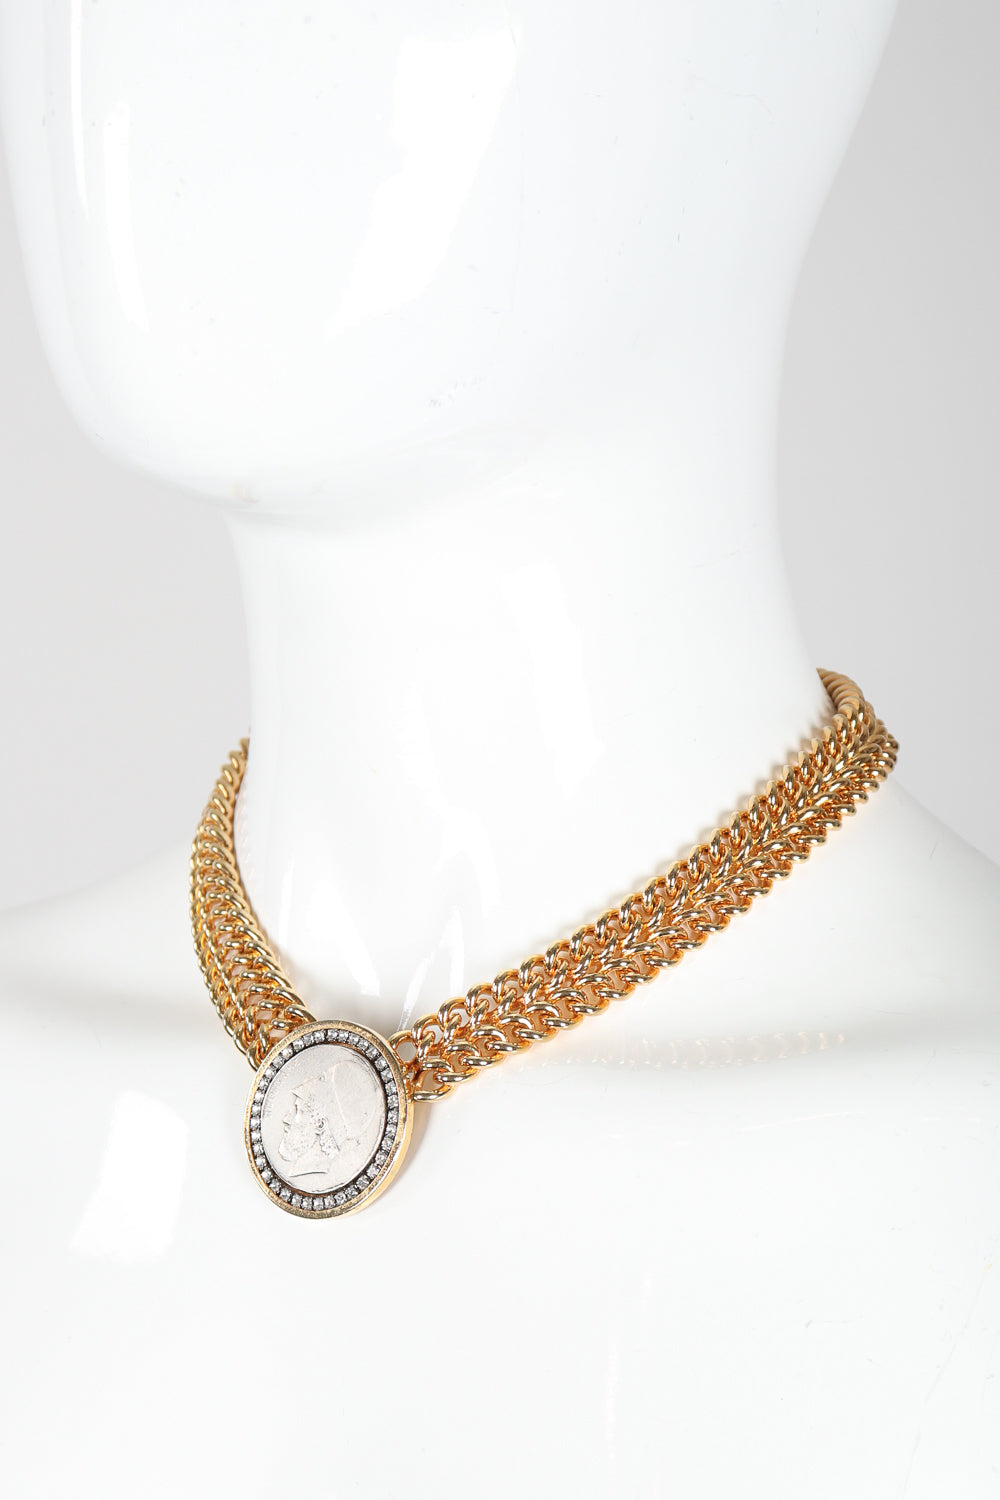 Recess Designer Consignment Vintage Les Bernard Greek Coin Chain Collar Pericles nepikahe Los Angeles Recycled Resale